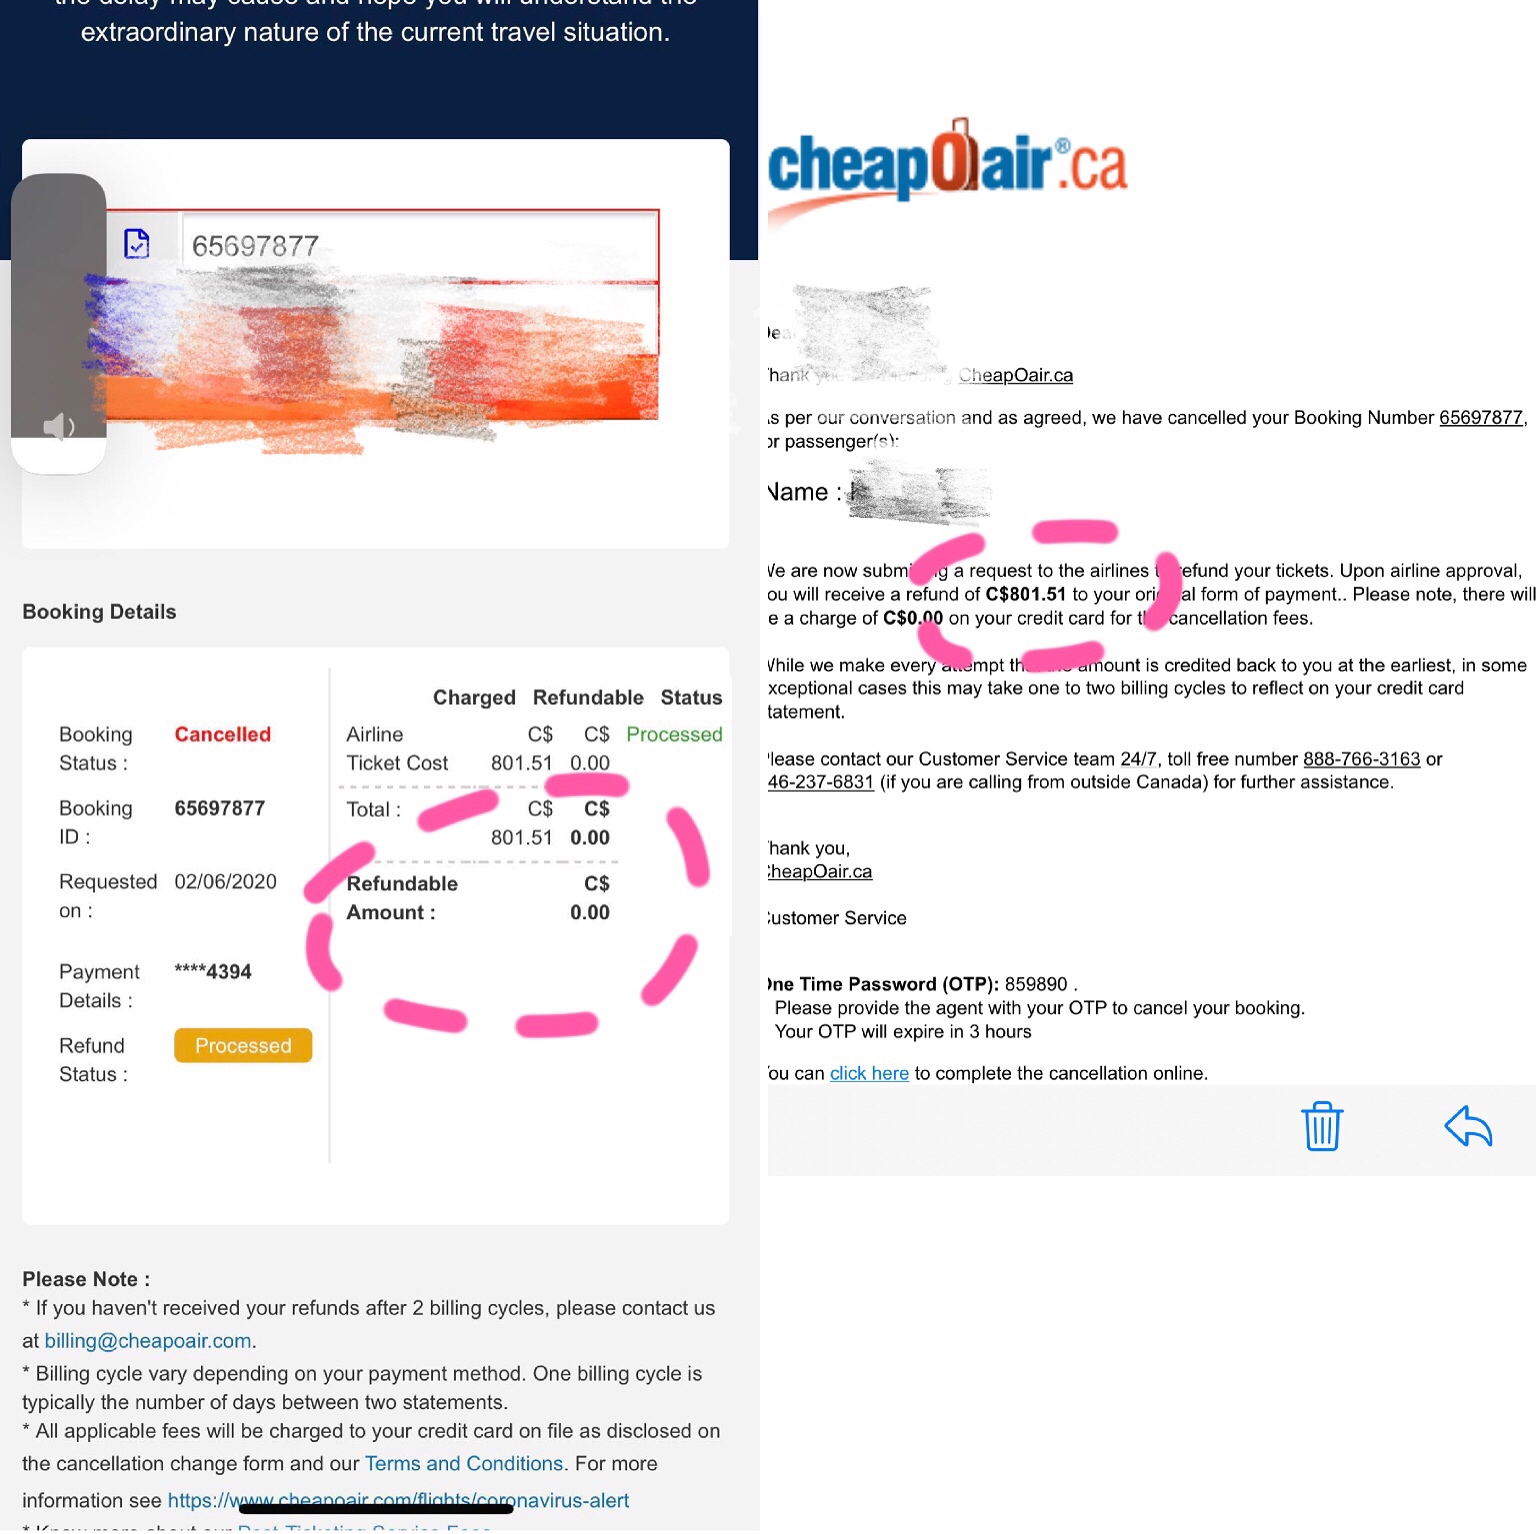 Cheapoair promised full refund but processed 0 